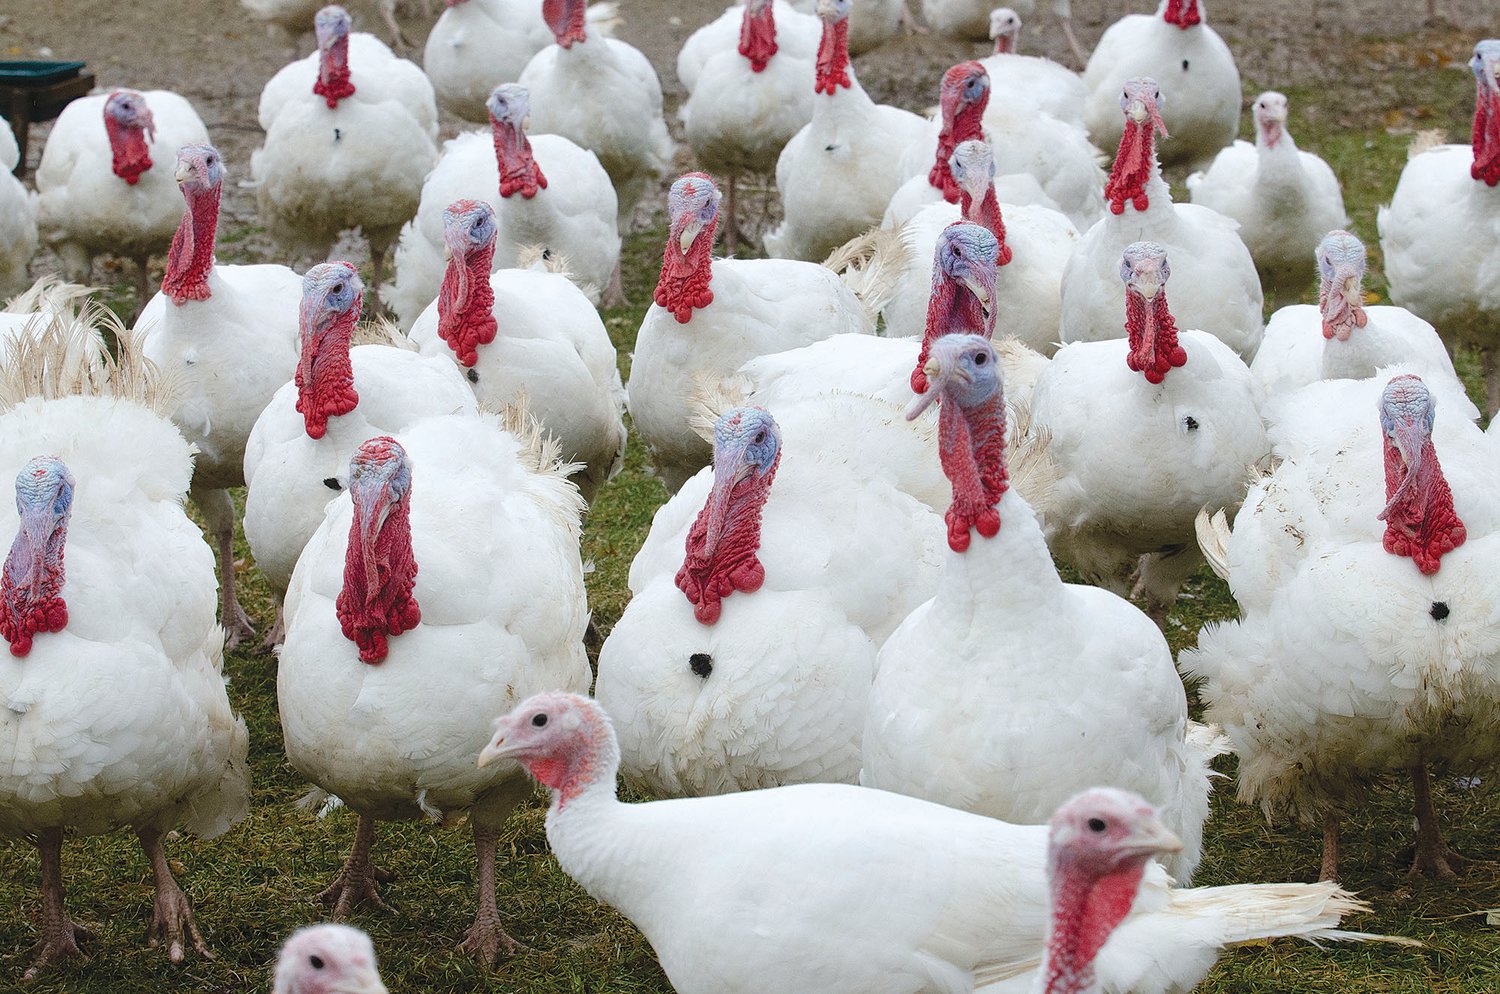 With reports of supply chain problems and potential turkey shortages in stores throughout the country, the phones started ringing early at Belwing Farm in Seekonk, which had sold nearly its entire stock of turkeys a few weeks before the big holiday.